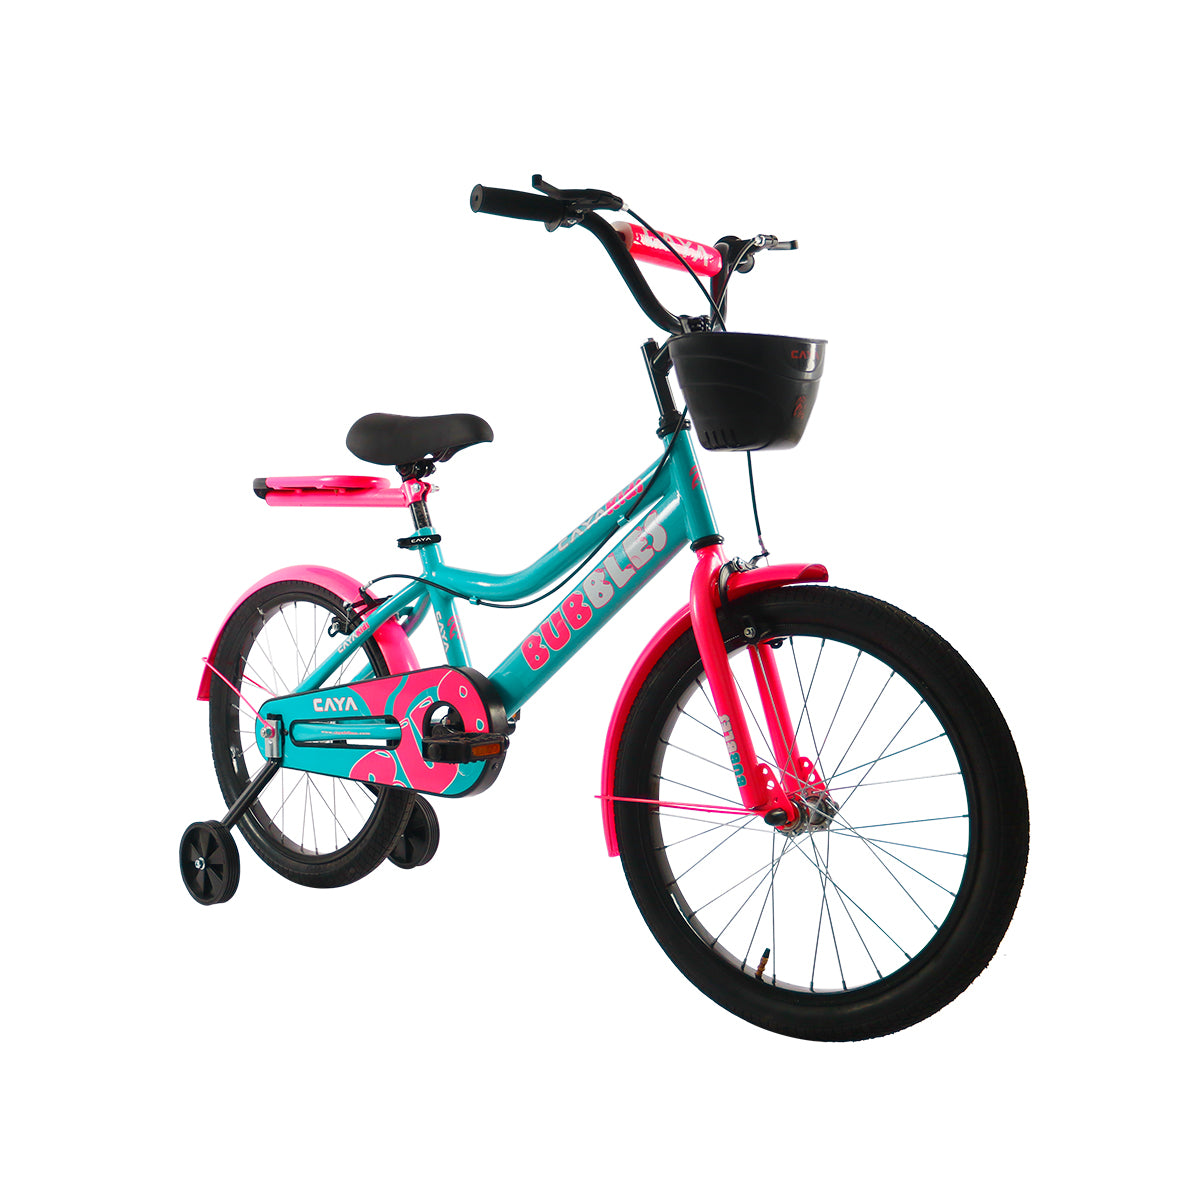 CAYA Bubbles 20 Kids Bicycle